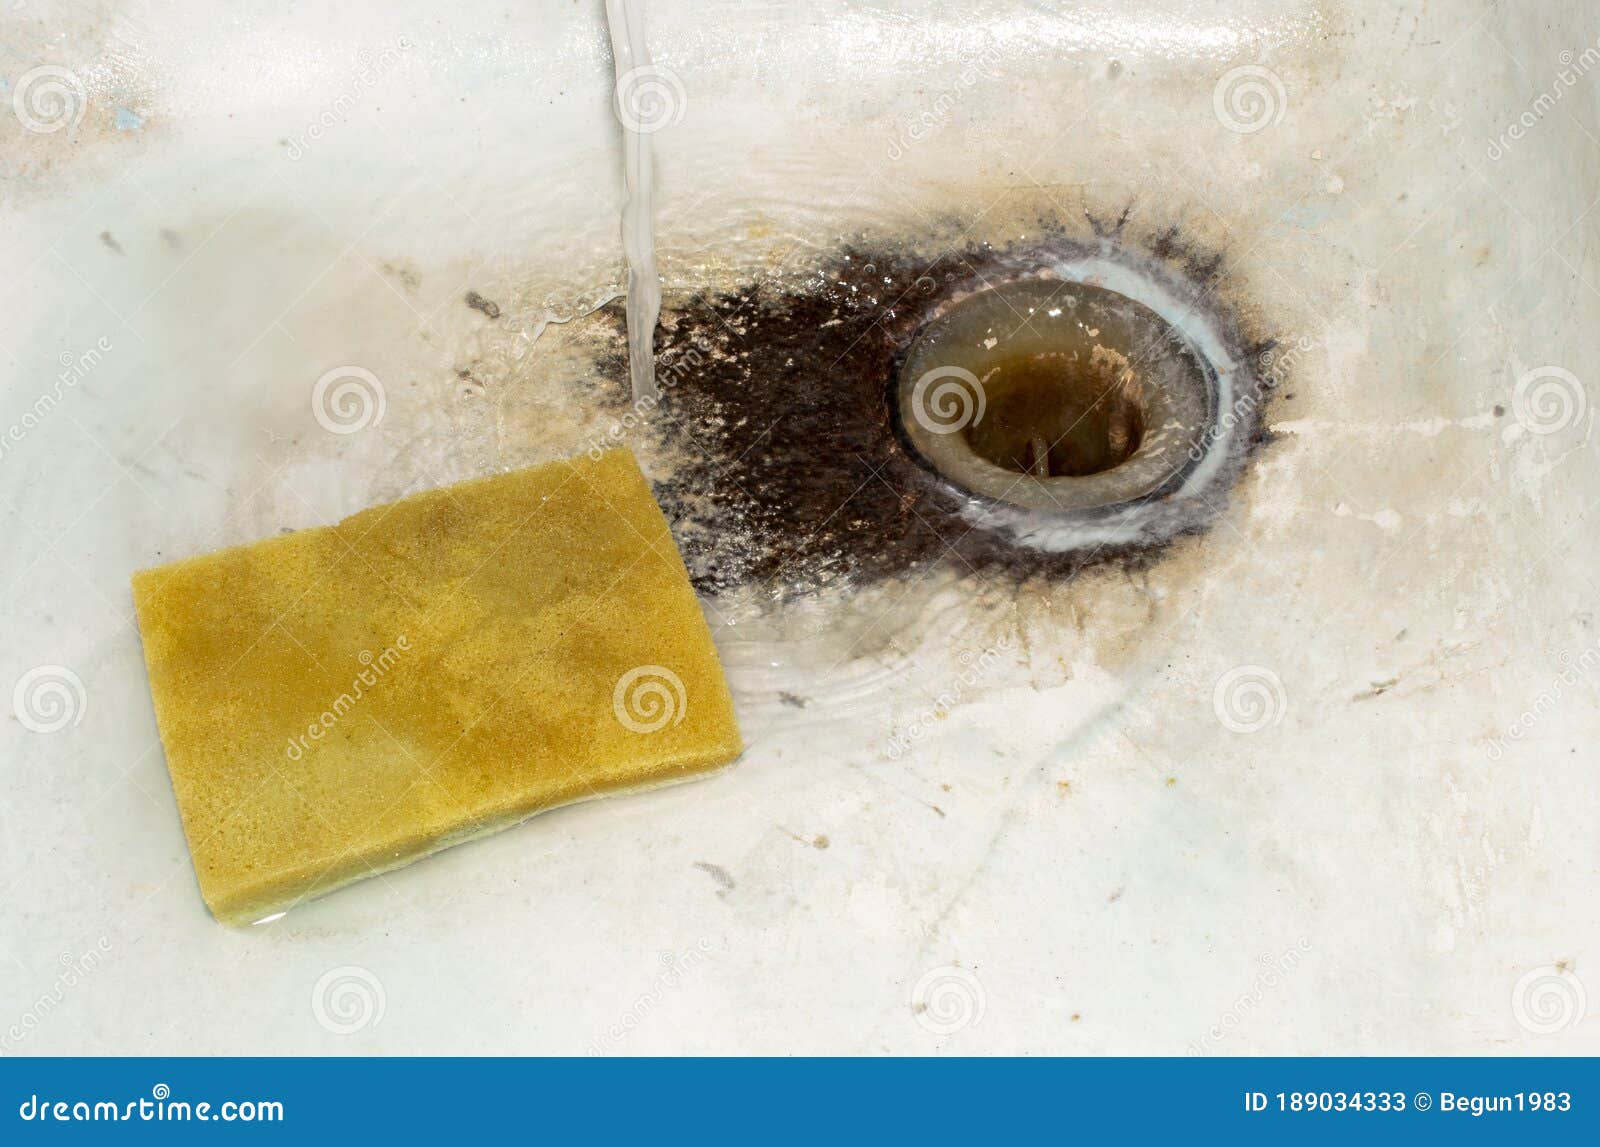 An old cast-iron sink. stock image. Image of plumbing - 189034333